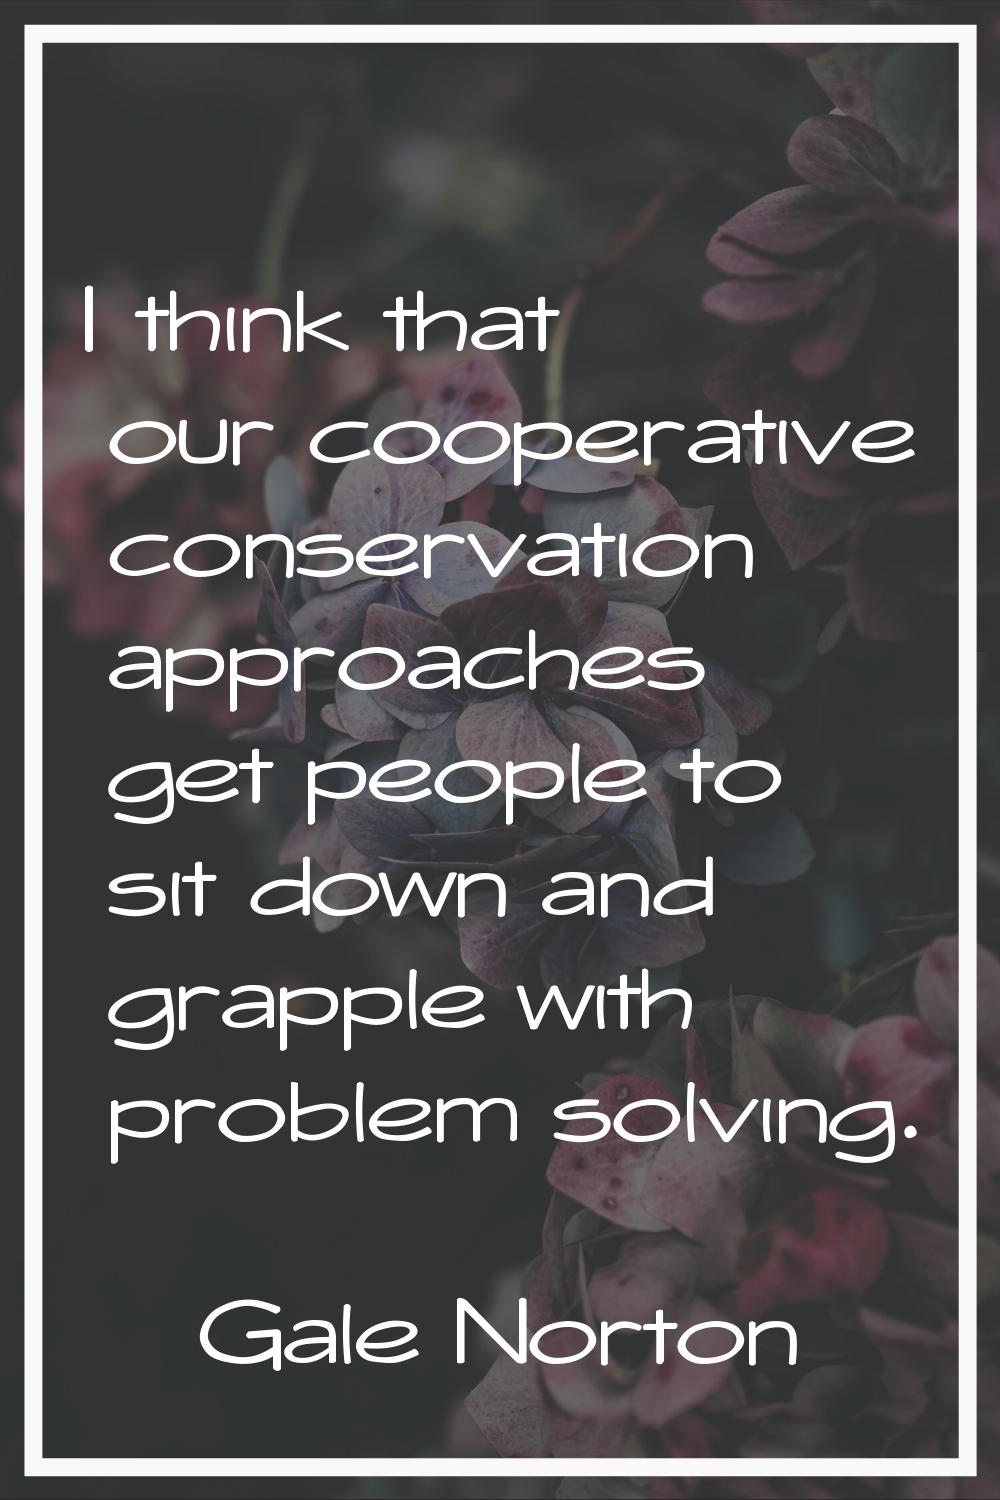 I think that our cooperative conservation approaches get people to sit down and grapple with proble